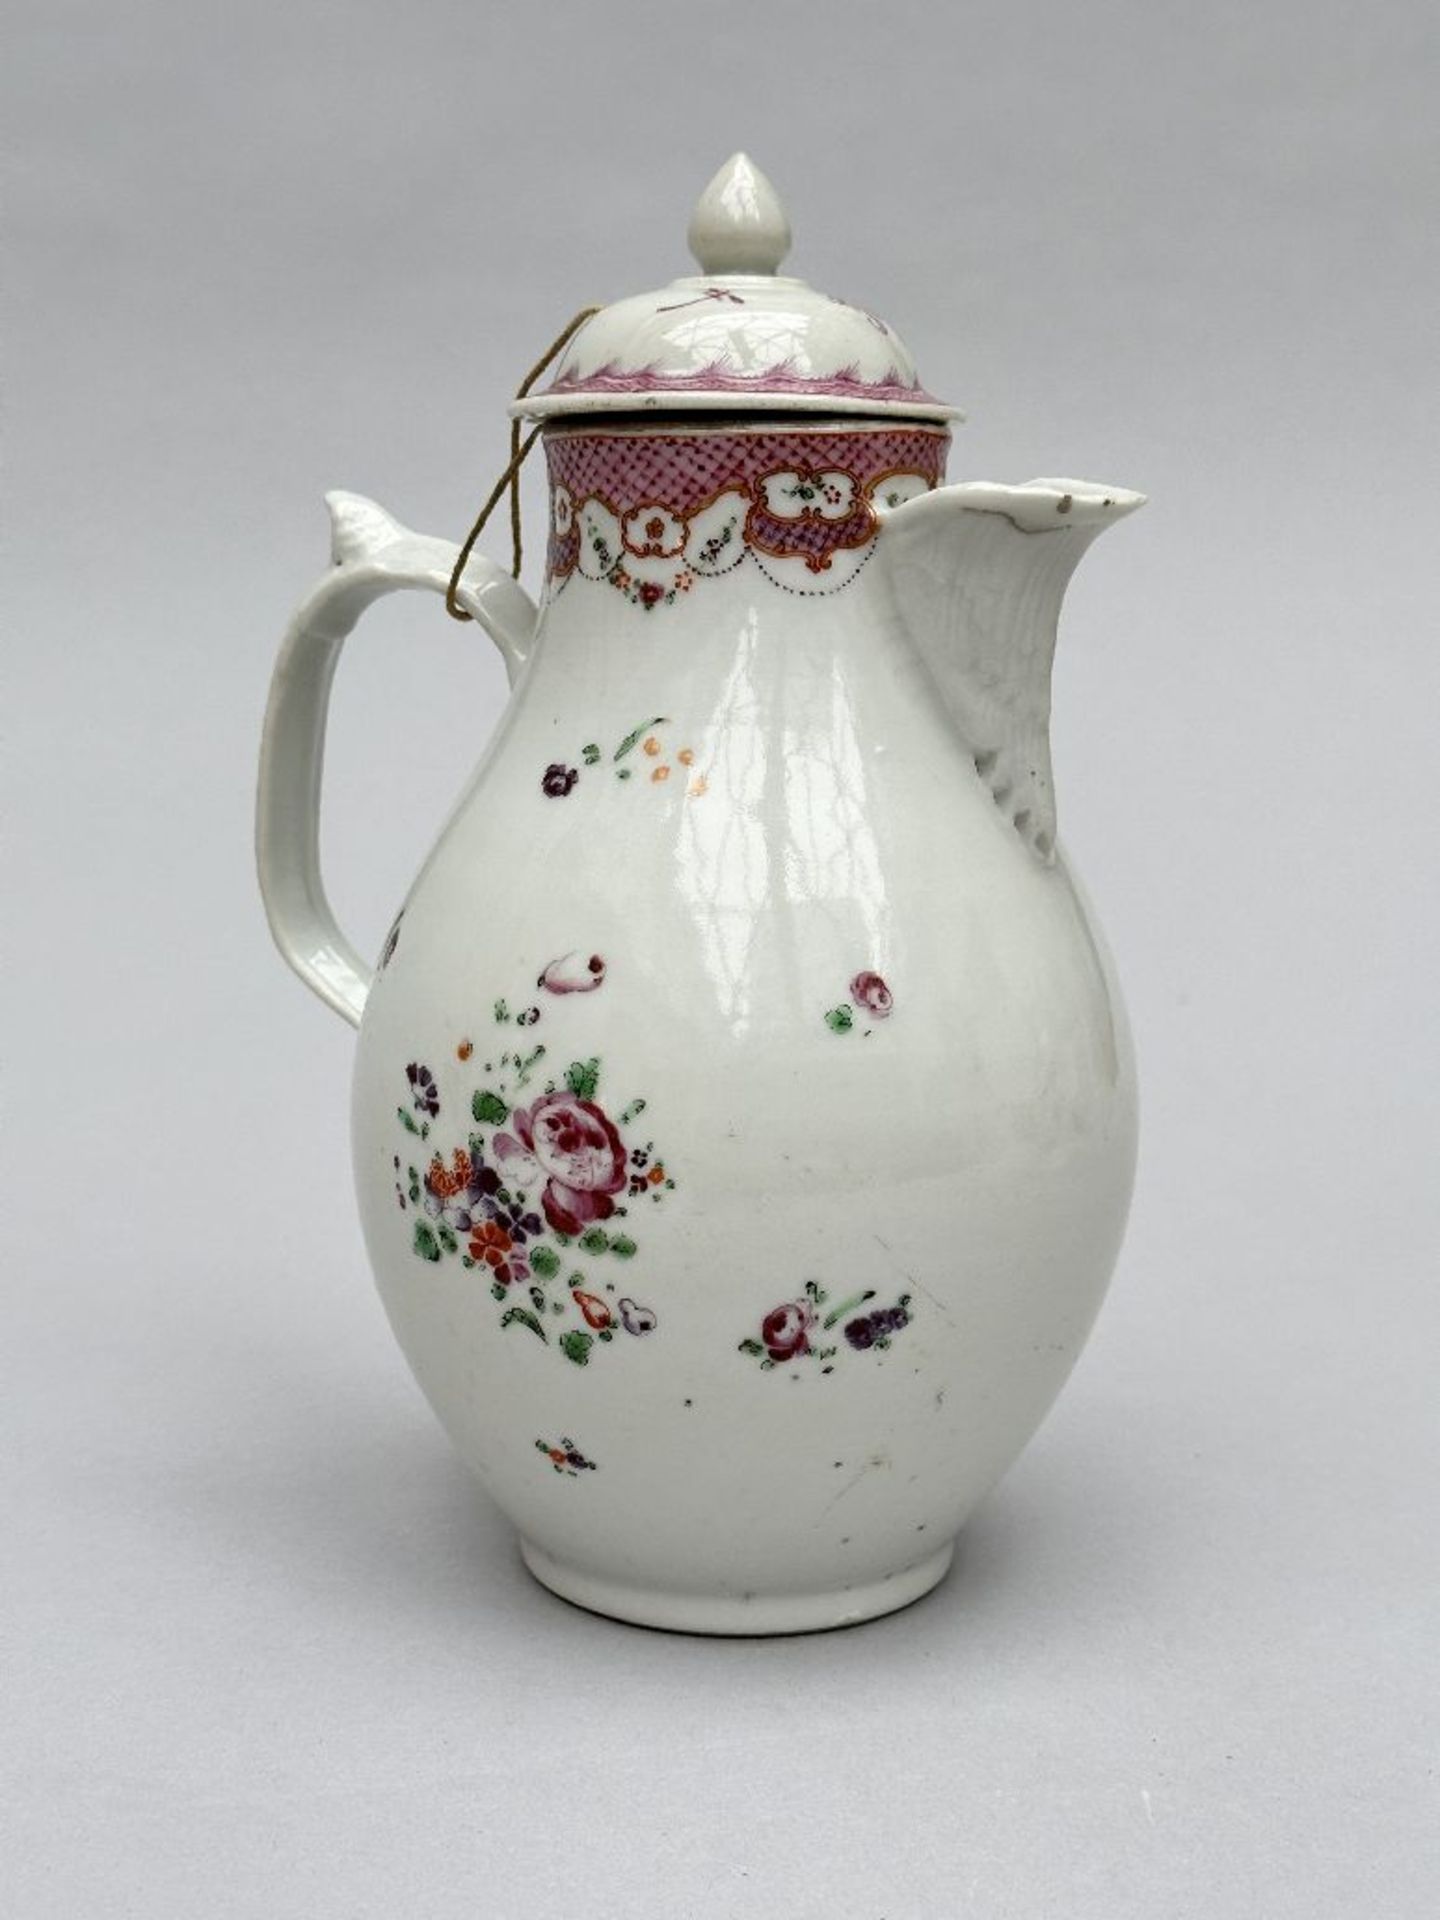 Collection of Chinese porcelain, 18th century: blue and white teapot, coffee cup and dish with monog - Image 2 of 6